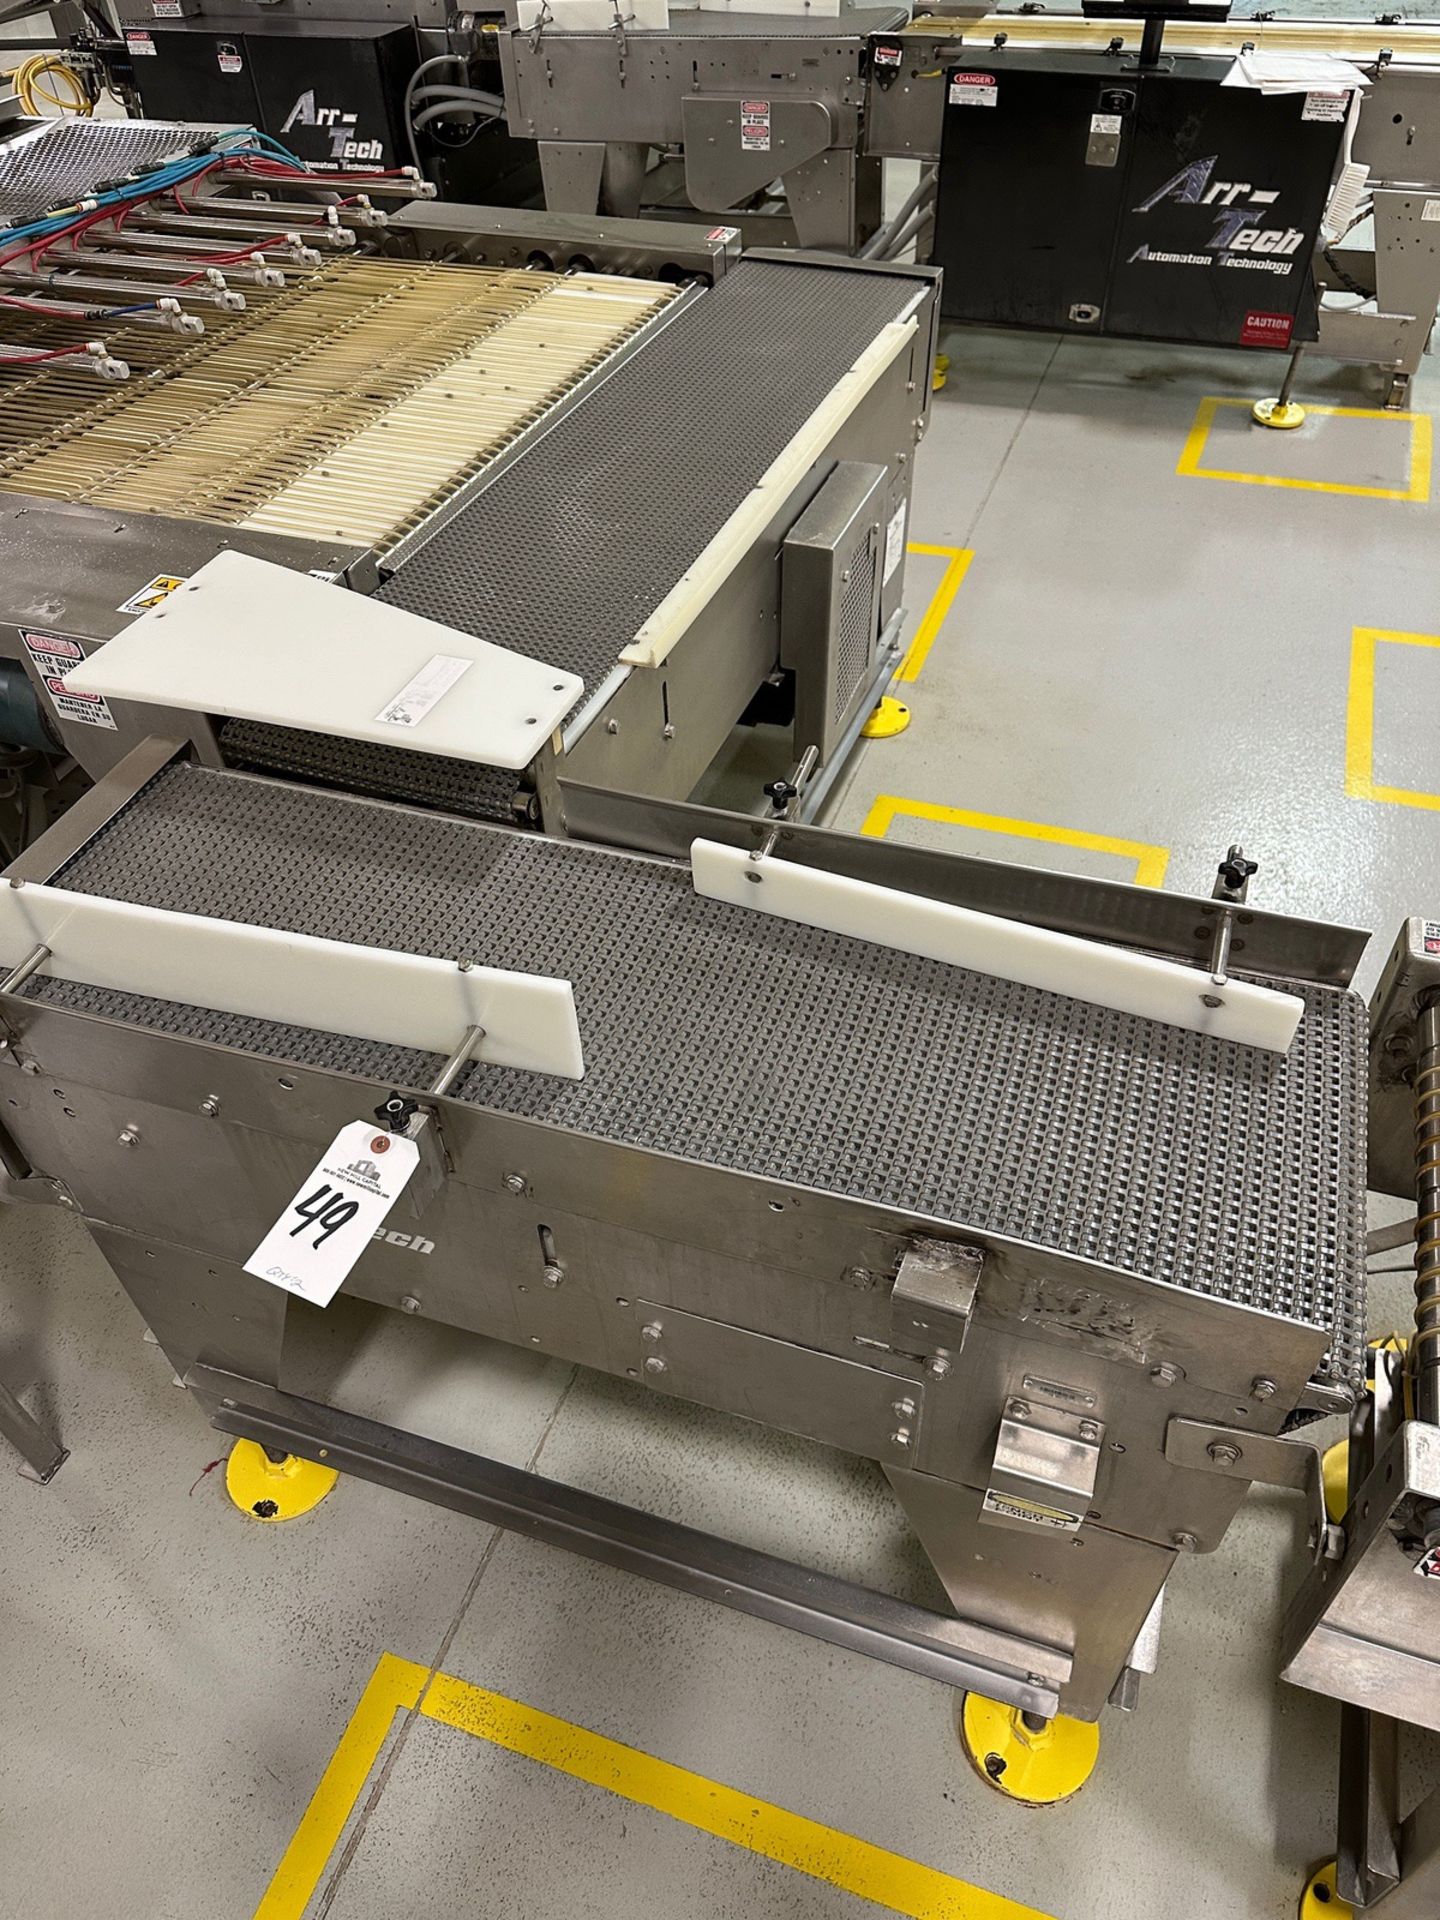 Lot of (2) Arr-Tech Intralox Belt over Stainless Steel Conveyors (Approx. 15" x 4' | Rig Fee $150